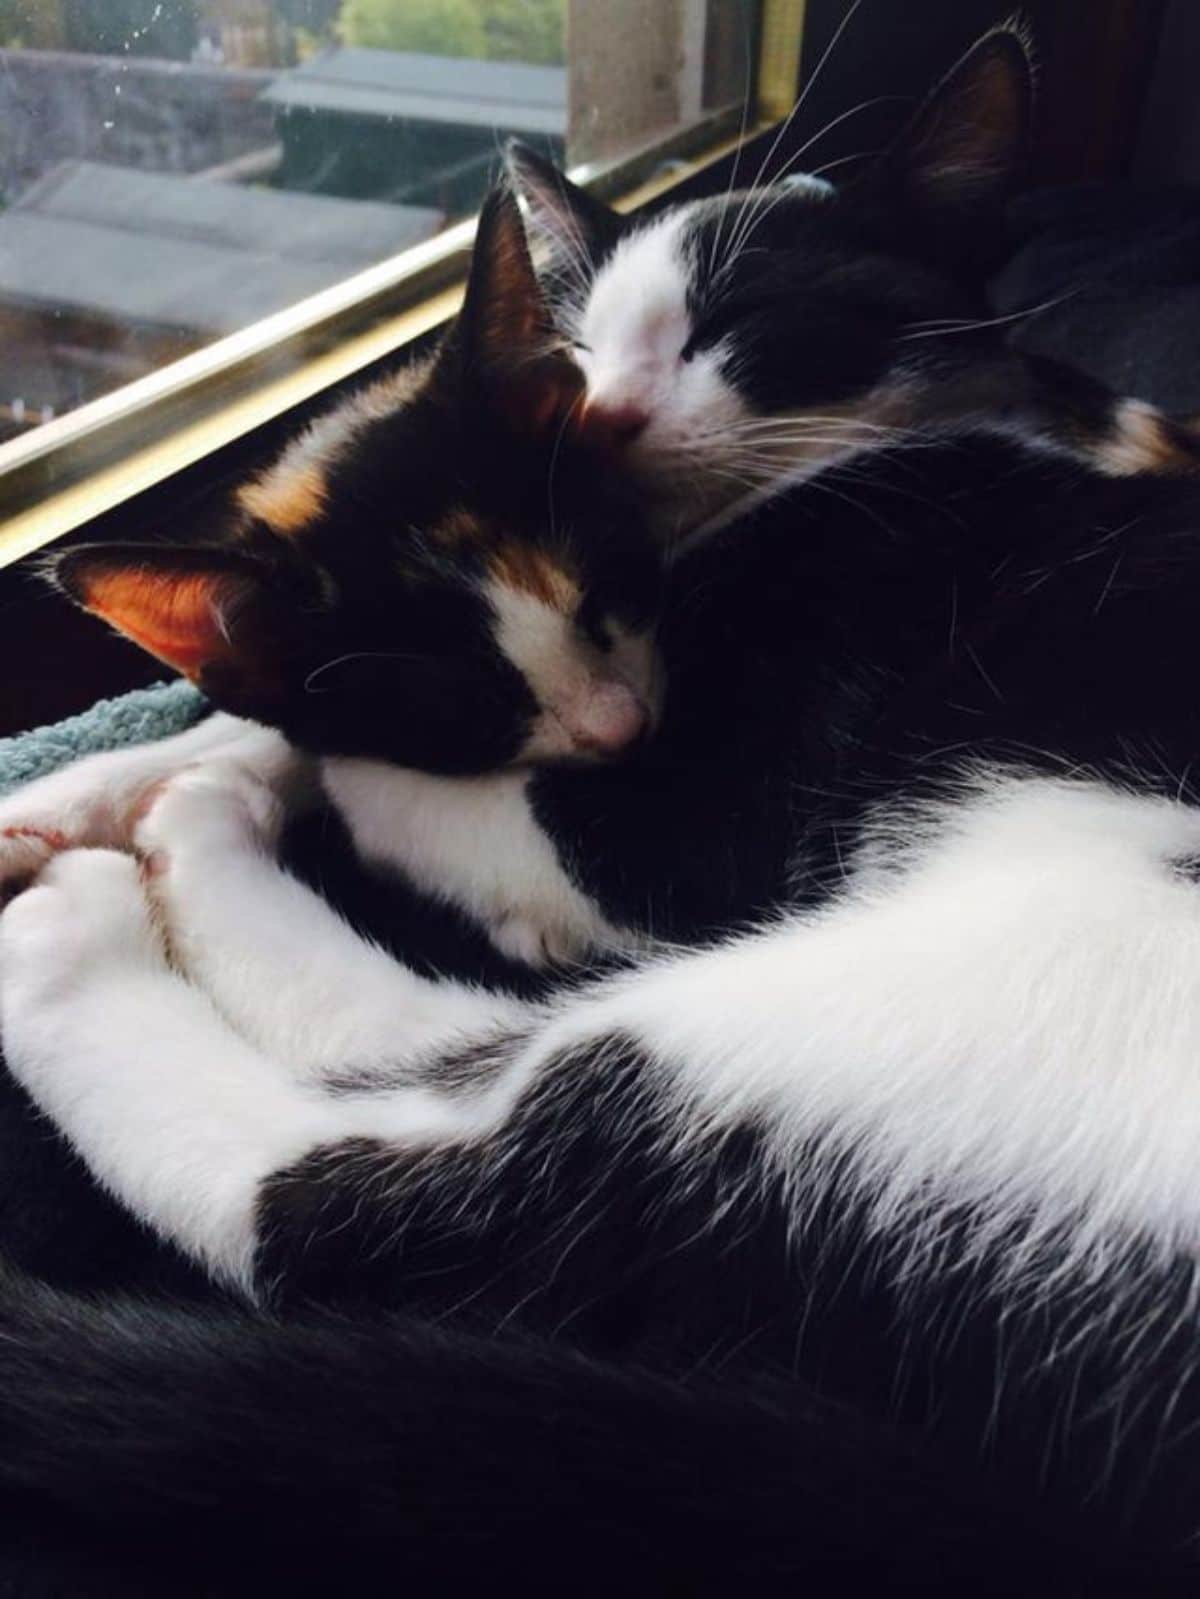 2 black and white cats cuddled up together